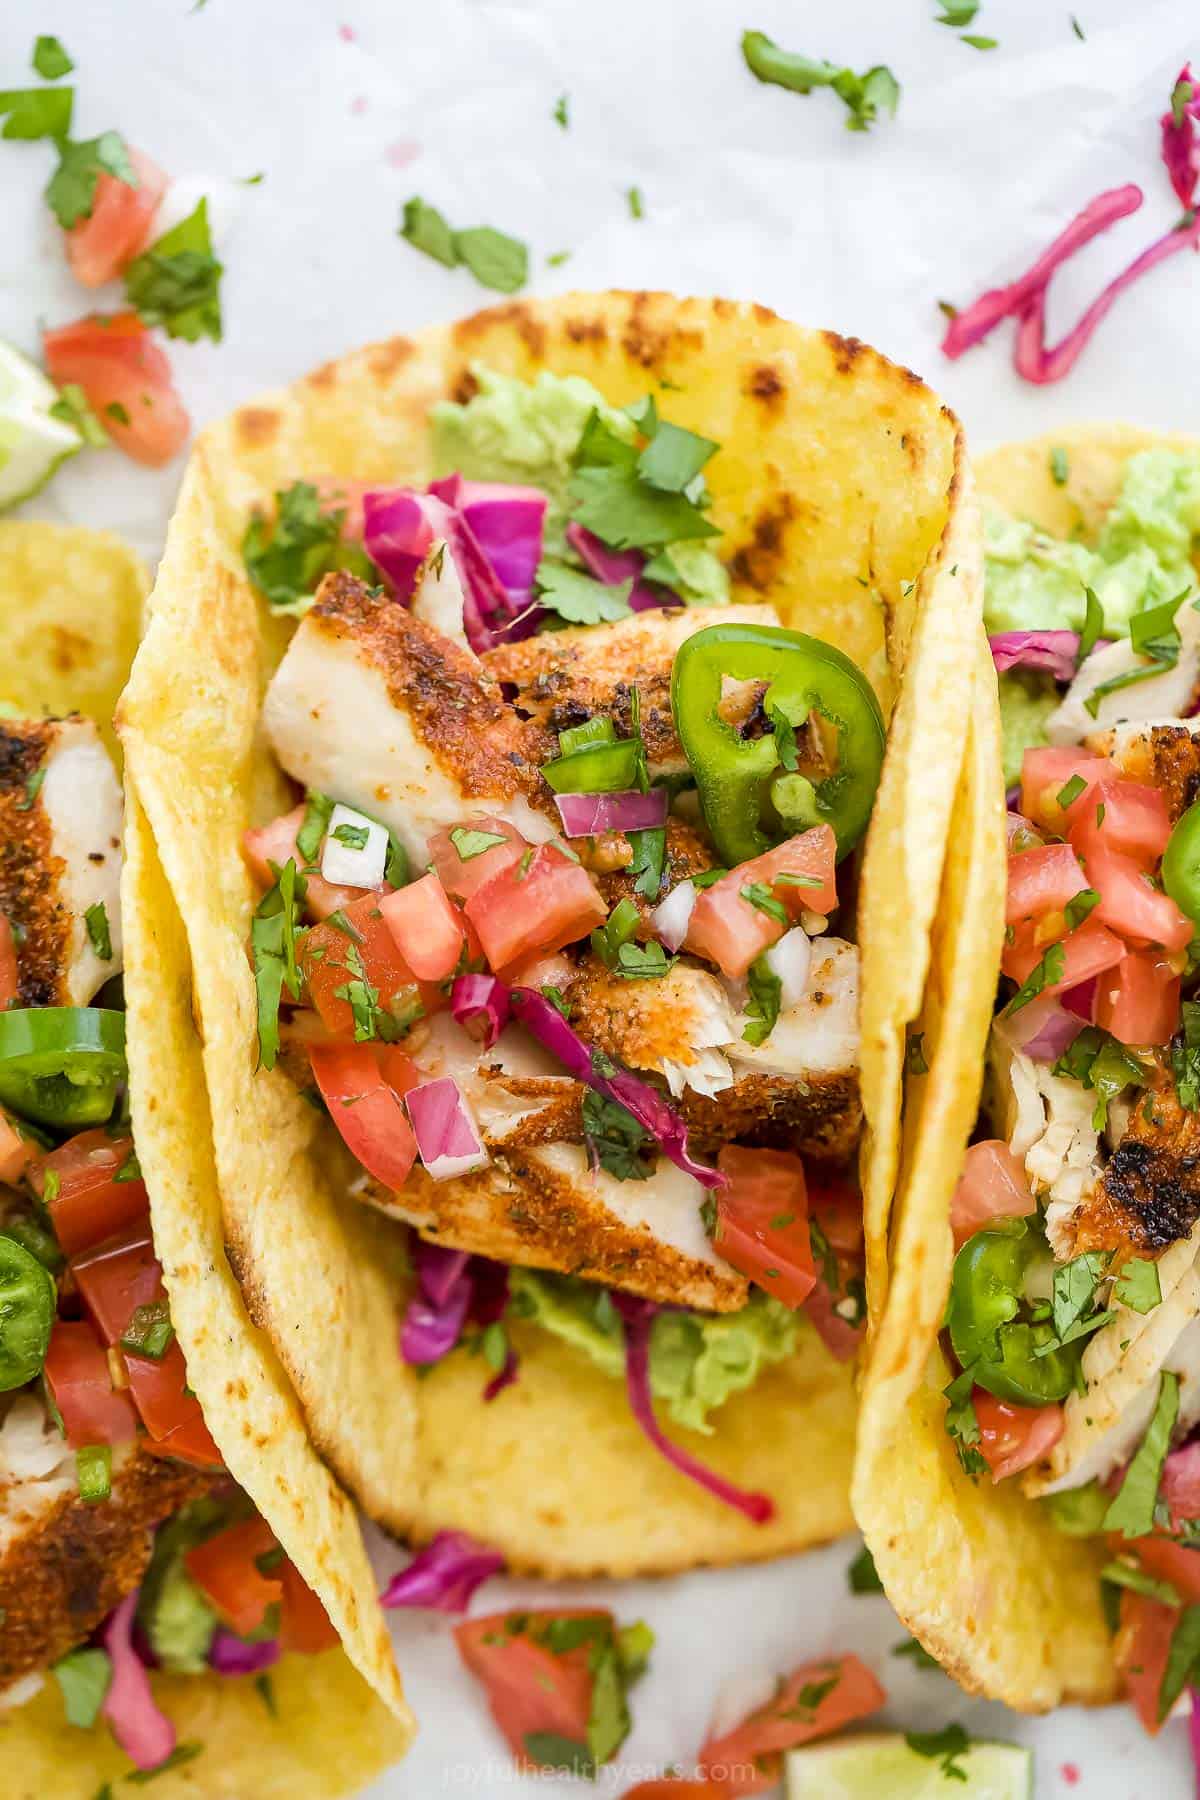 A close-up shot of a grilled white fish taco with chipotle lime crema and pico de gallo